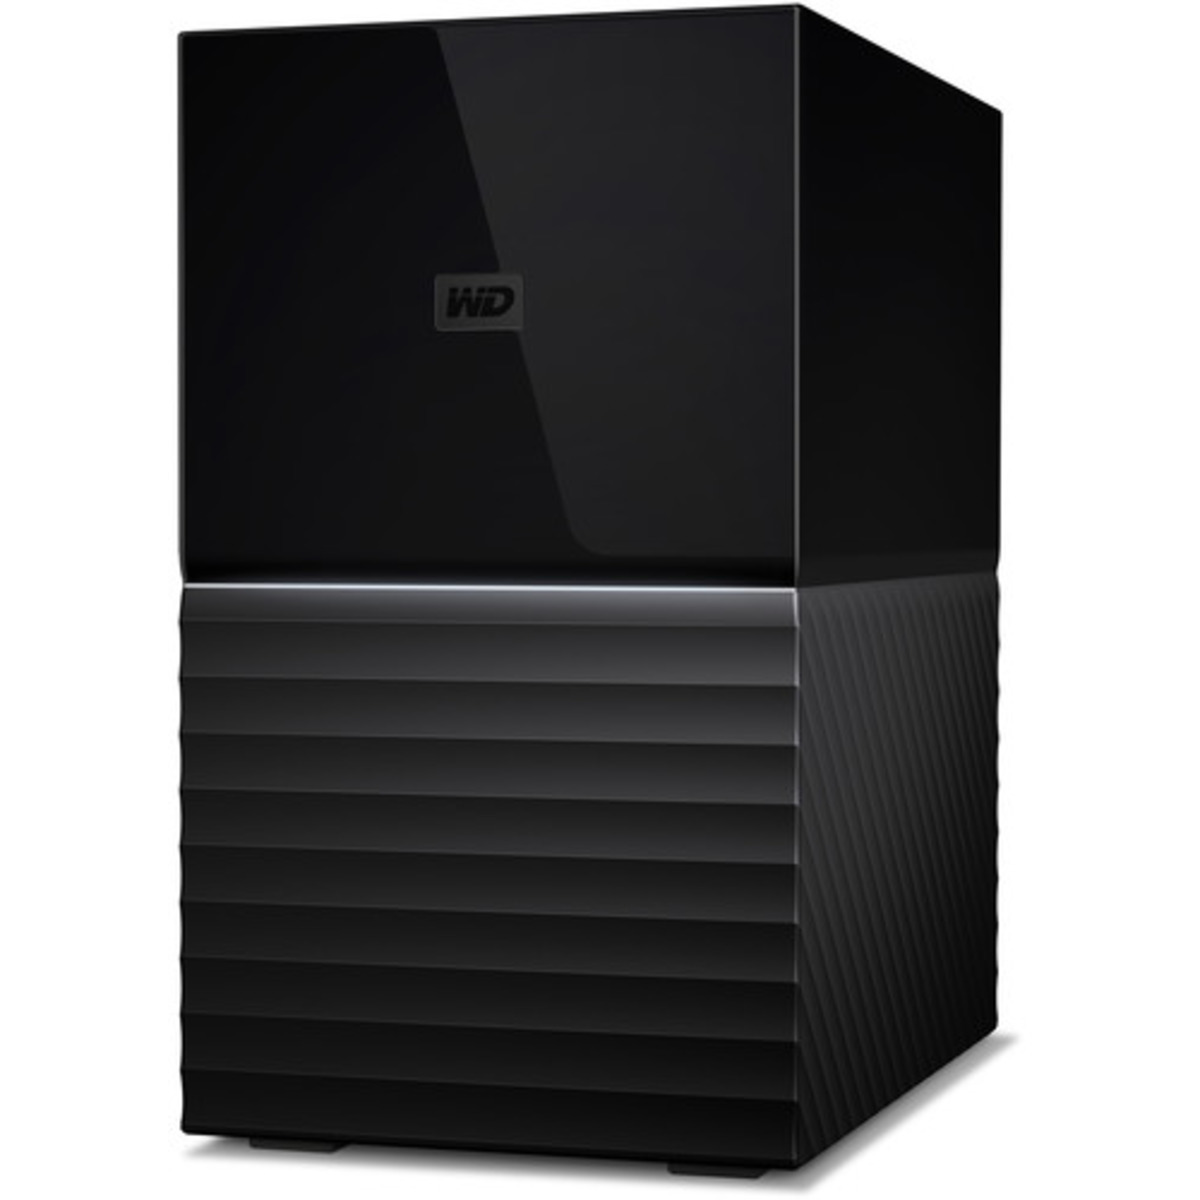 Western Digital My Book DUO Gen 2 16tb 2-Bay Desktop Personal / Basic Home / Small Office DAS - Direct Attached Storage Device 2x8tb Western Digital Red Plus WD80EFPX 3.5 7200rpm SATA 6Gb/s HDD NAS Class Drives Installed - Burn-In Tested - ON SALE My Book DUO Gen 2